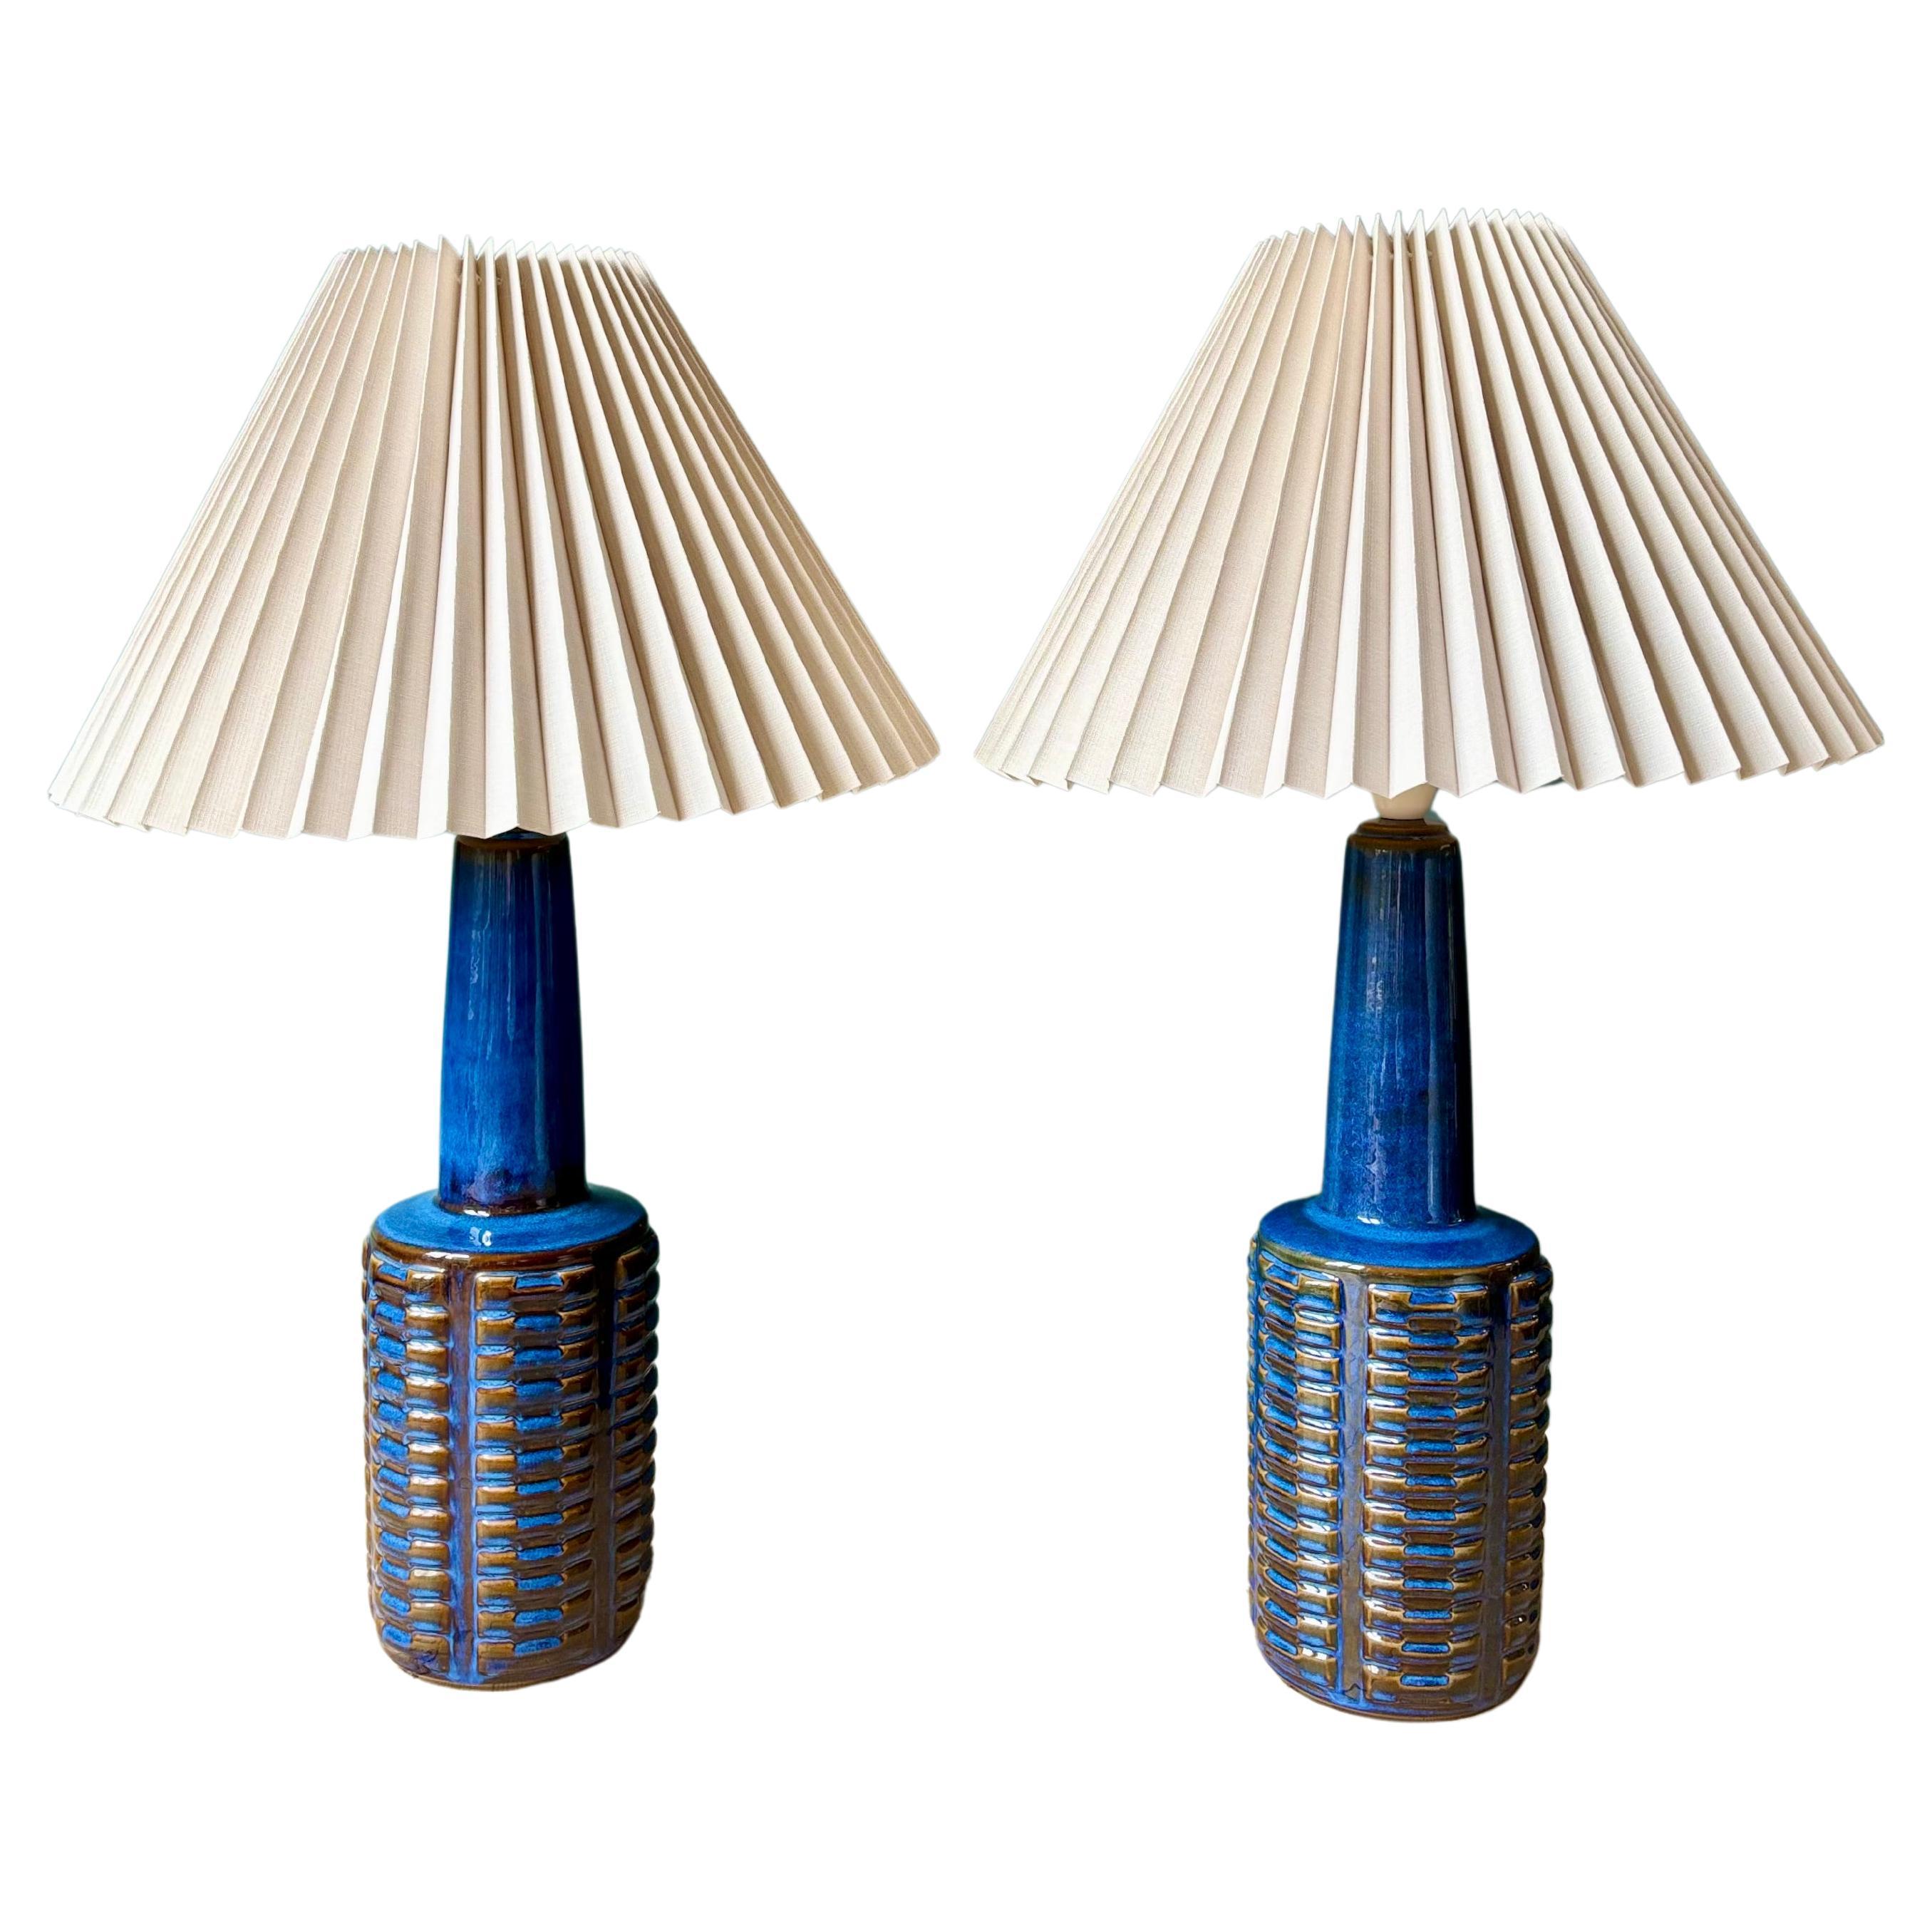 Soholm Pottery Floor Lamps